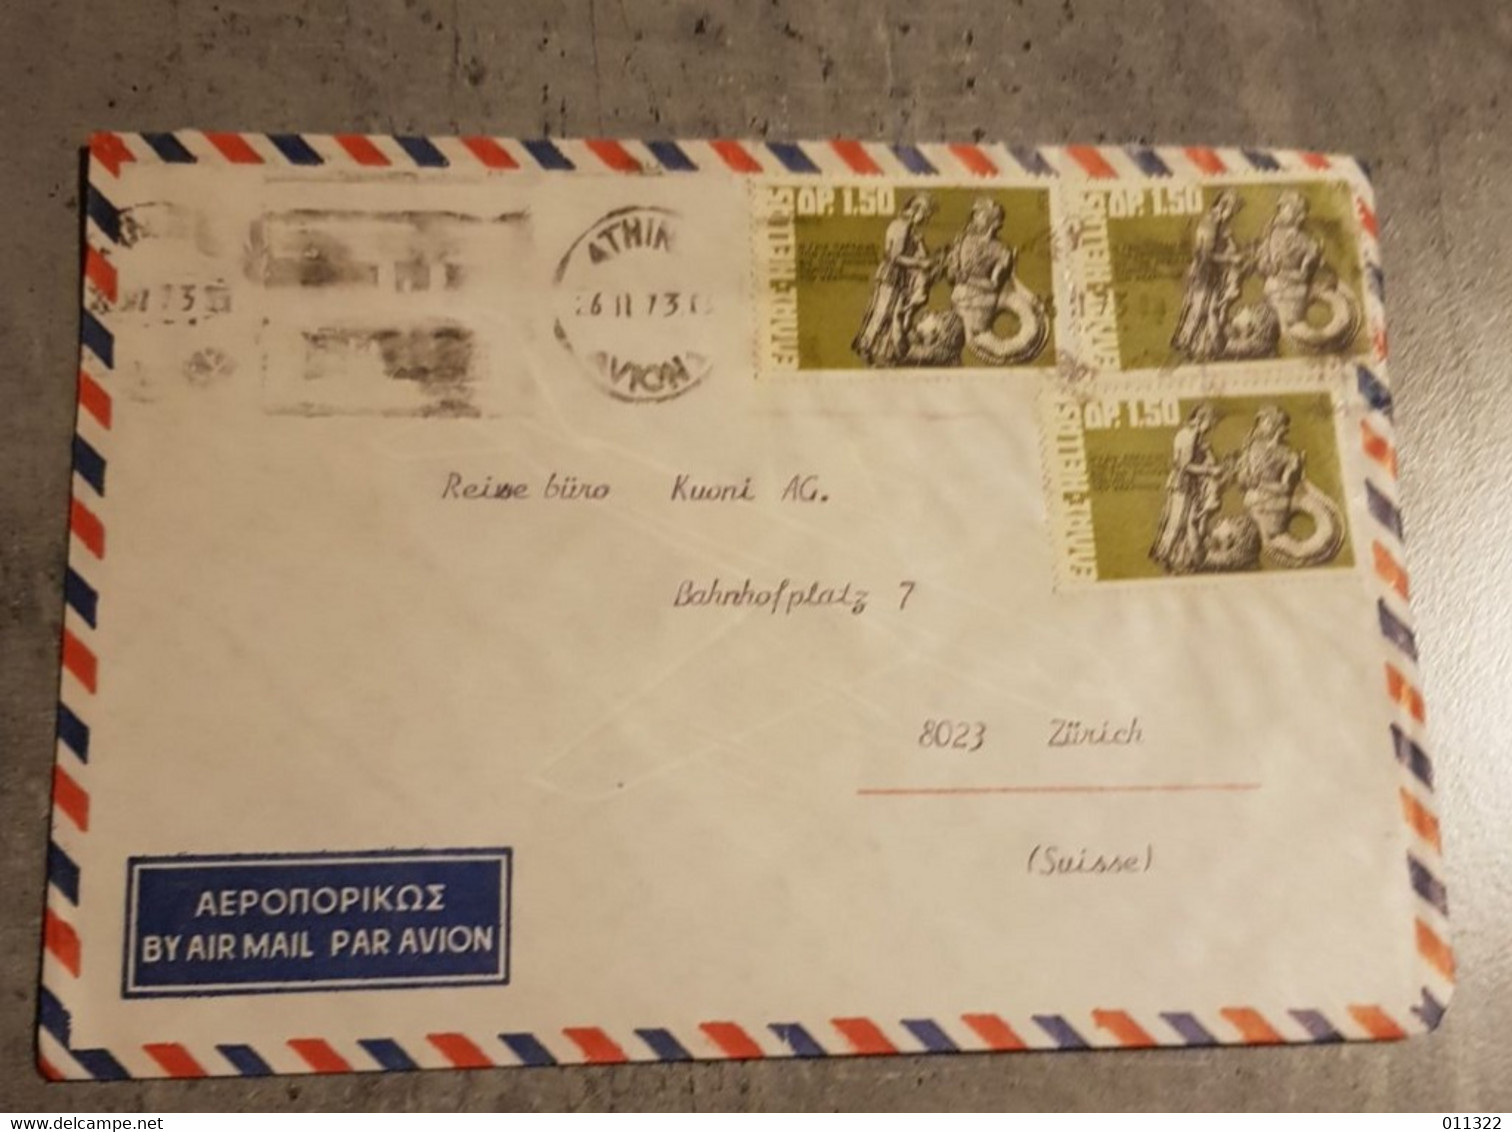 GREECE AIR MAIL LETTER ENVELOPPE CIRCULED SEND TO SUISSE - Lettres & Documents